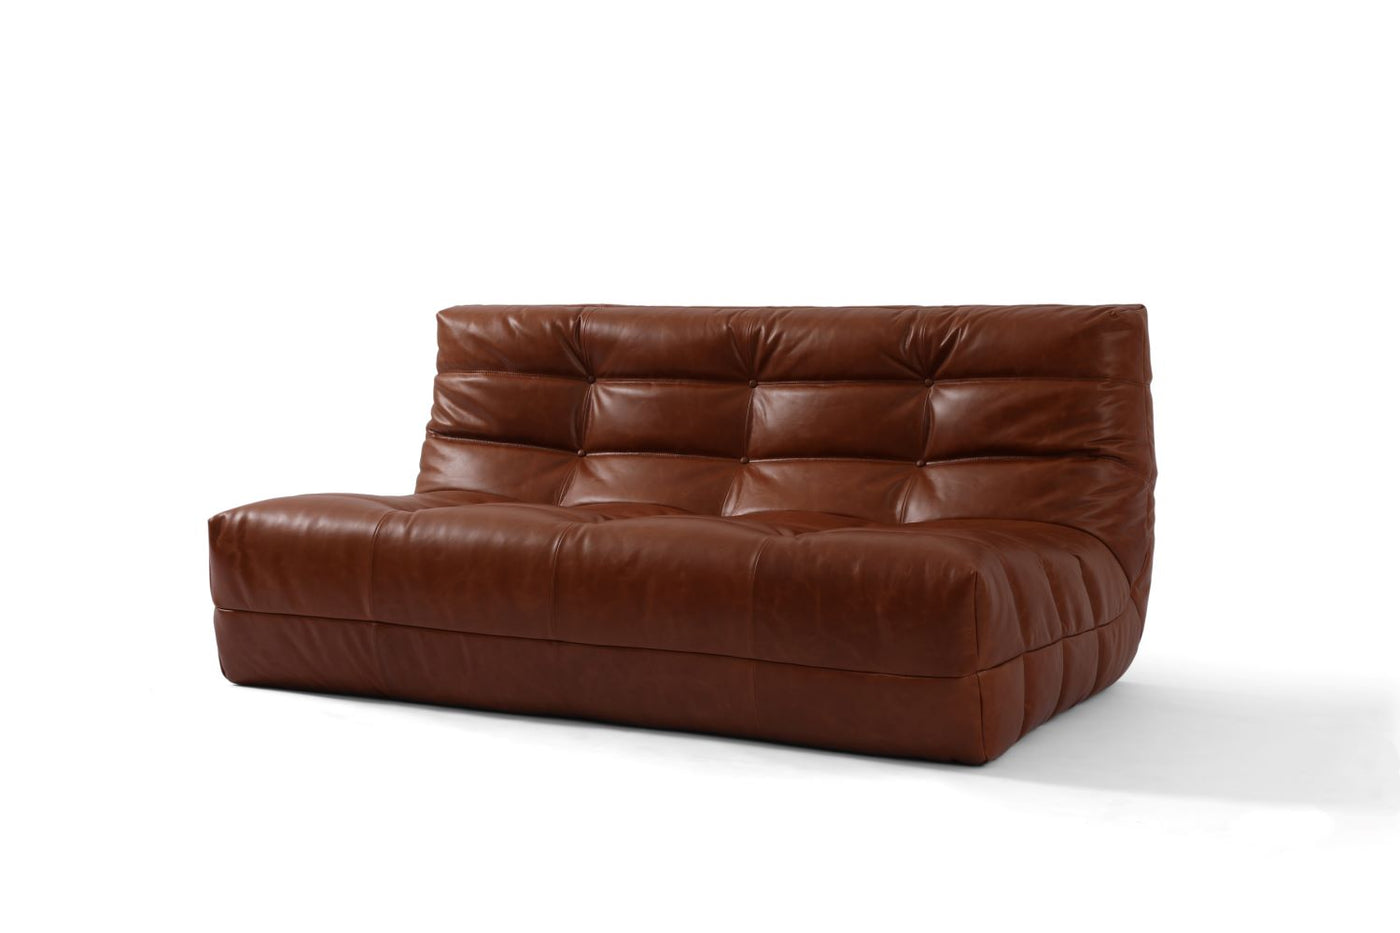 Russo2 Sofa in Soft Vintage leather (3 Piece set)